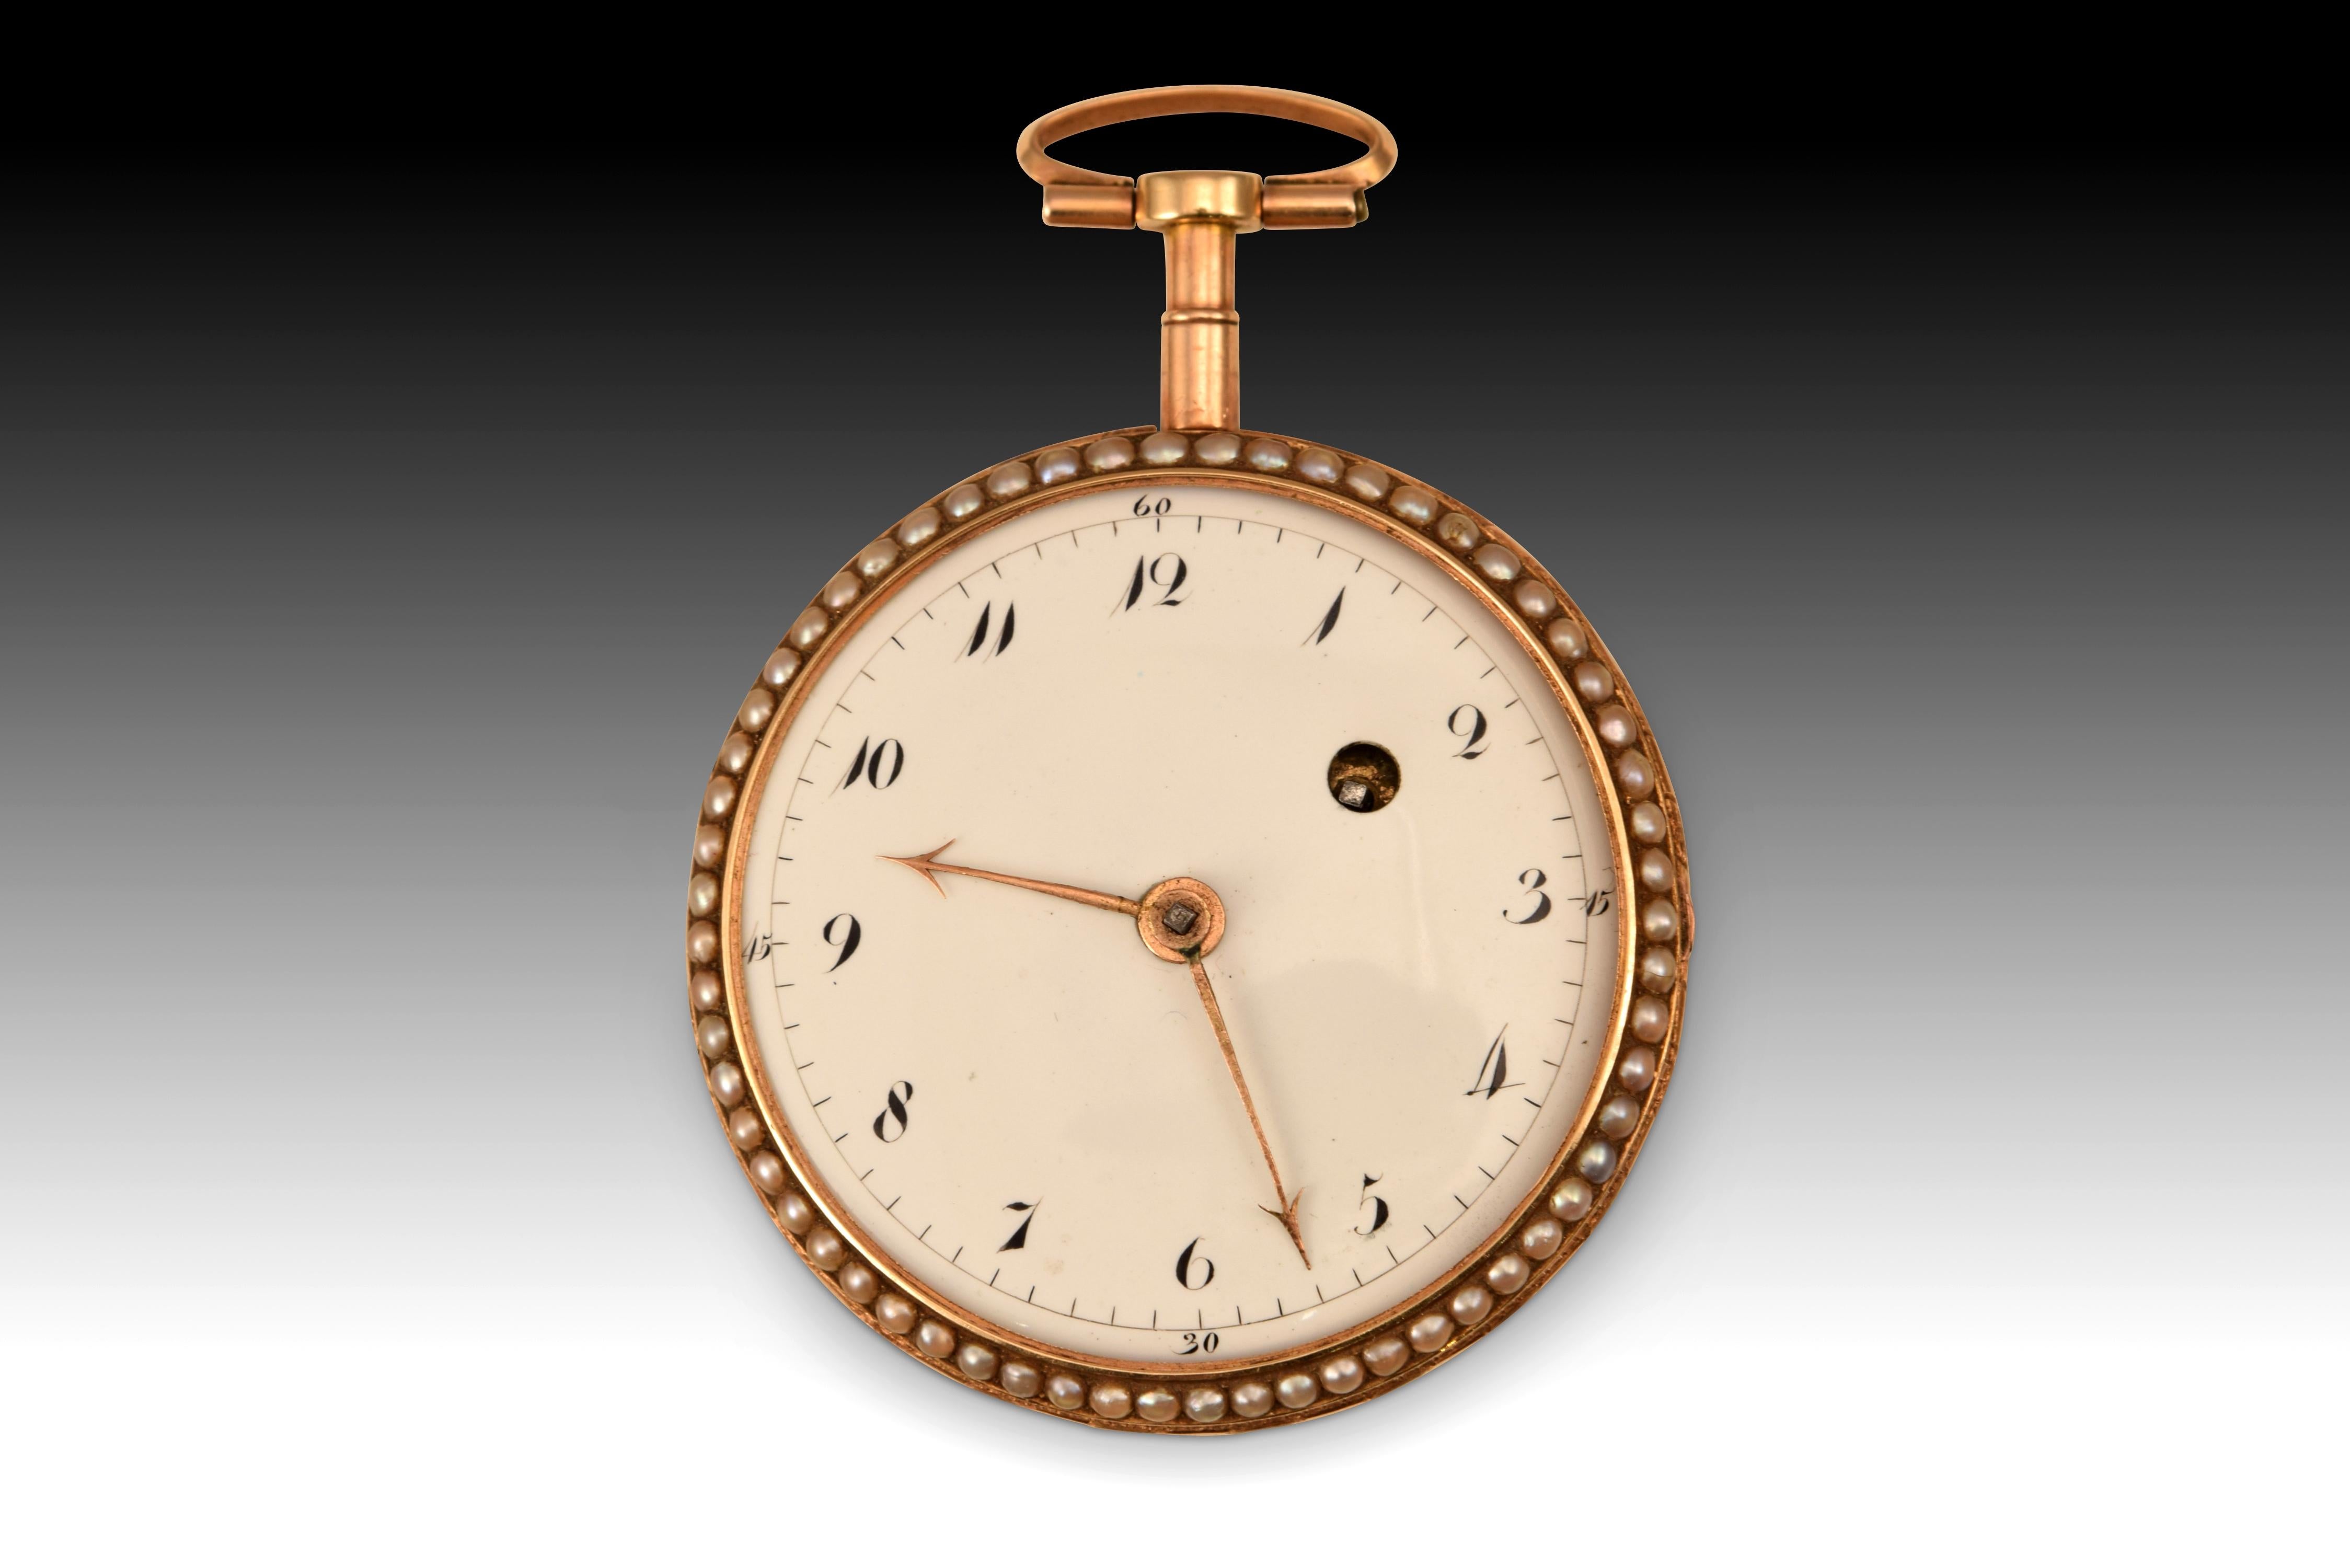 Pocket watch, Jaqs Blanc. gold, enamel, etc. Possibly towards the end of the 18th century. 
Pocket watch with a white dial and Arabic numerals for the hours and lines and Arabic numerals every fifteen units for the minutes with a decorated movement